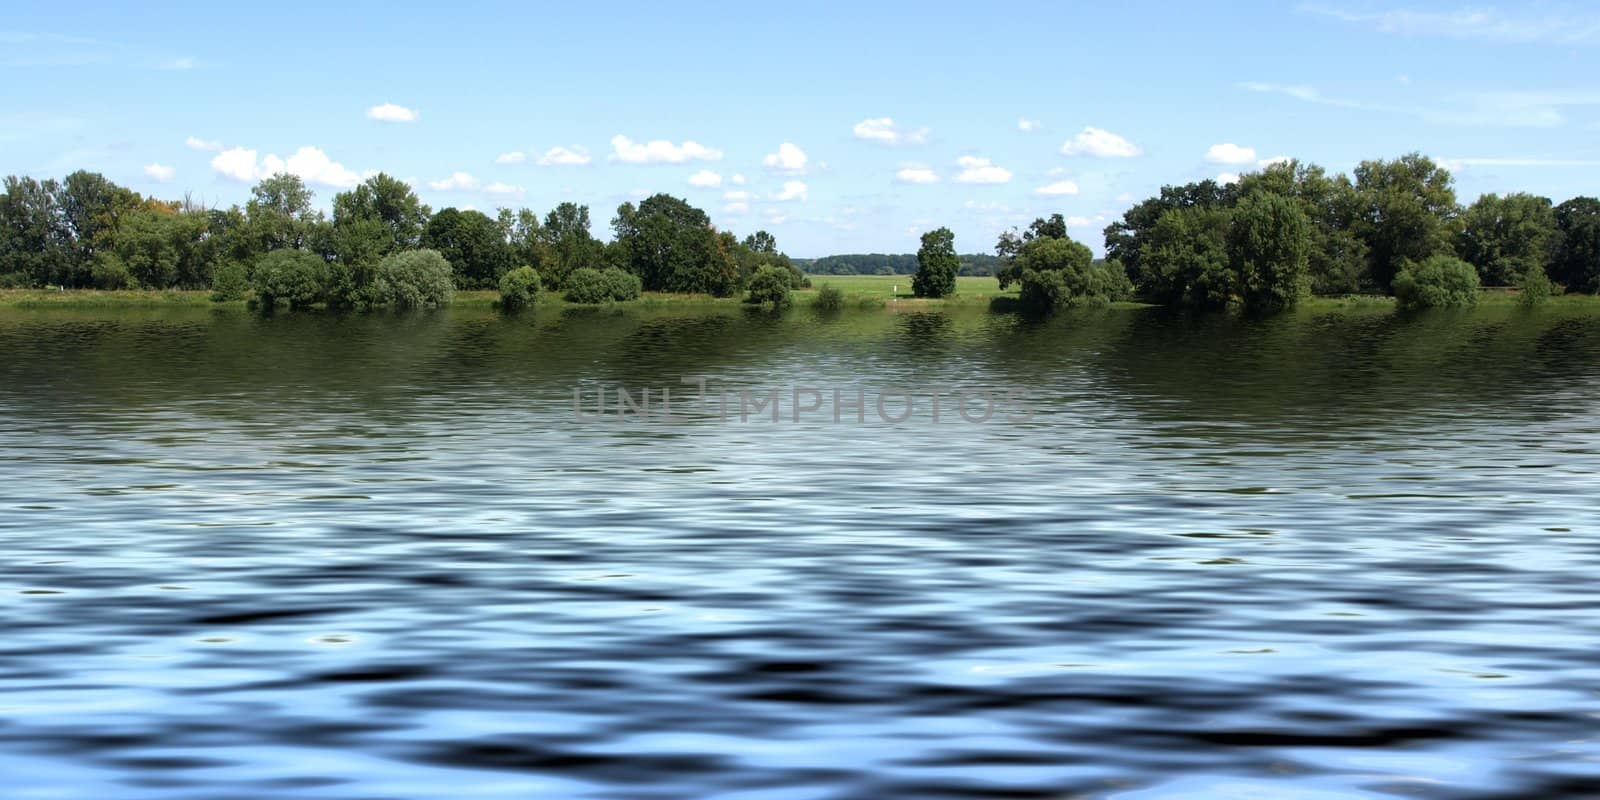 View of River Elbe in Dessau, Germany